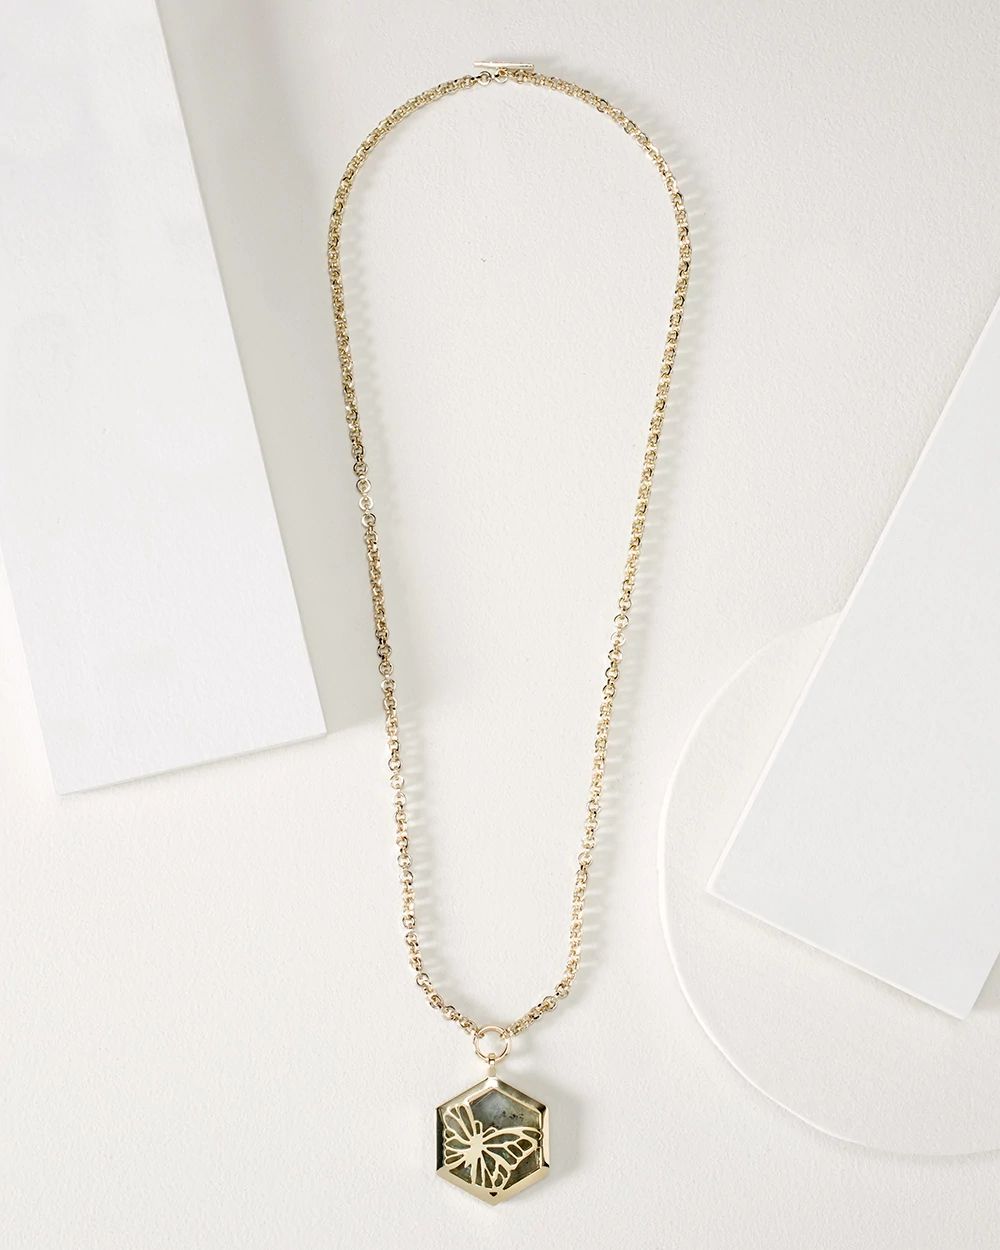 Goldtone & Labradorite Convertible Necklace click to view larger image.